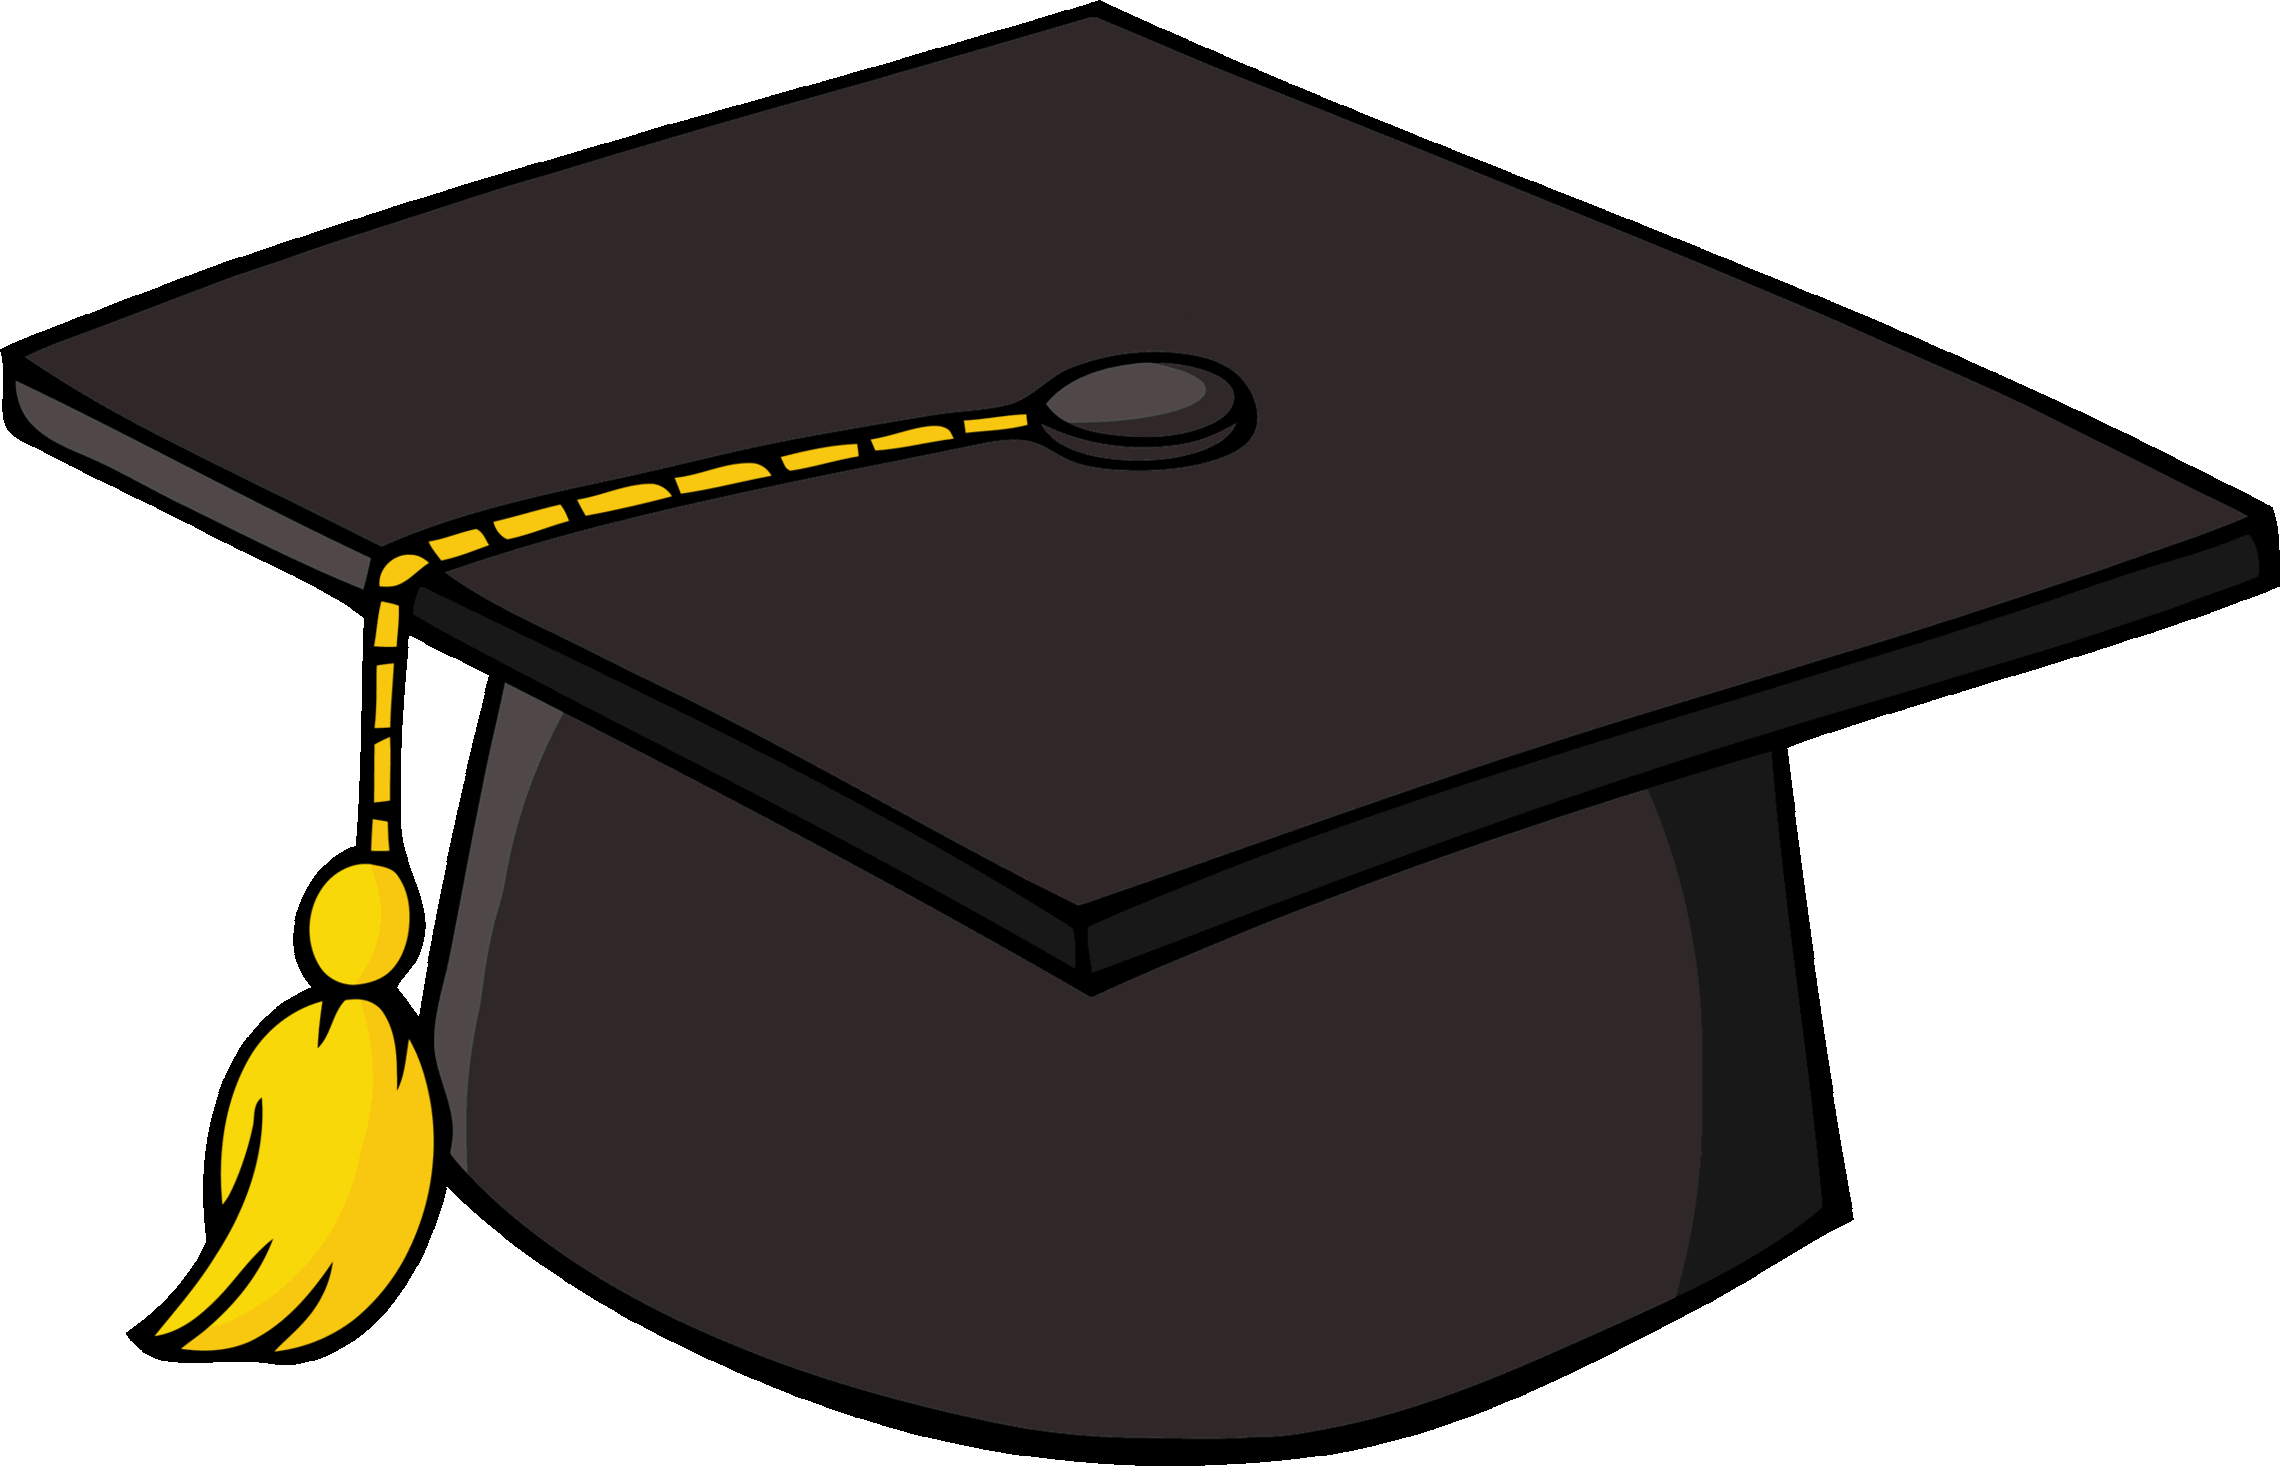 Cap clipart animated. Entracing graduation tassel collection